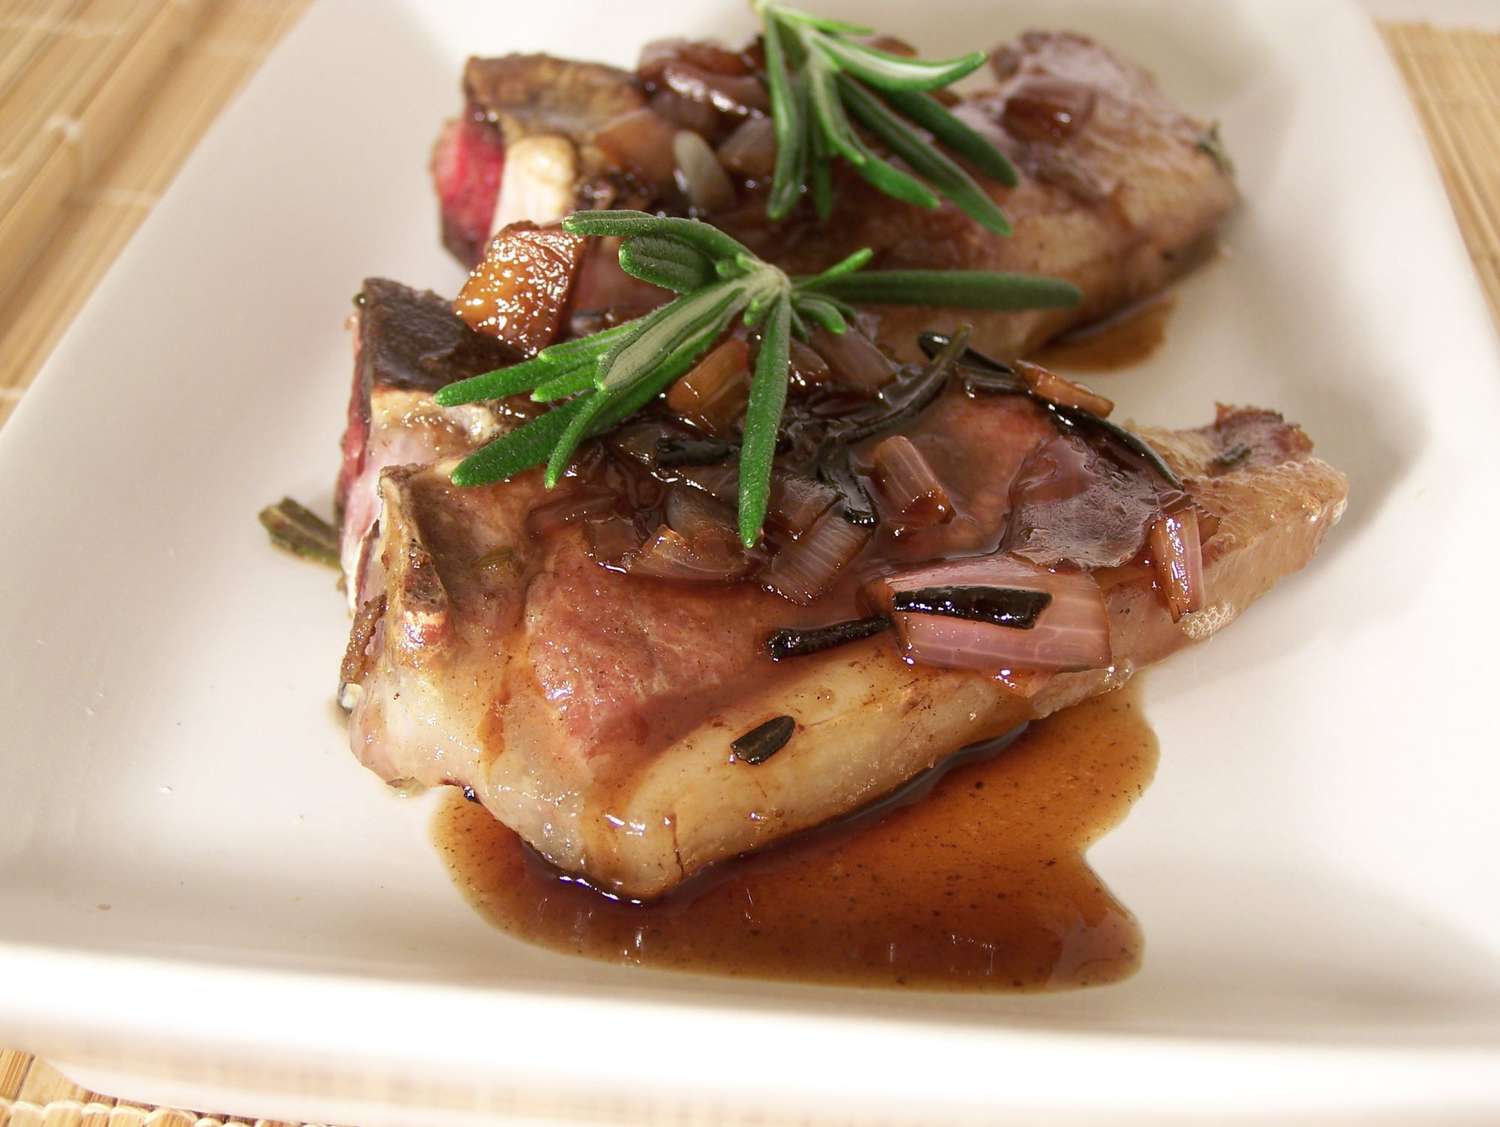 two Lamb Chops with Balsamic Reduction garnished with fresh rosemary on a plate